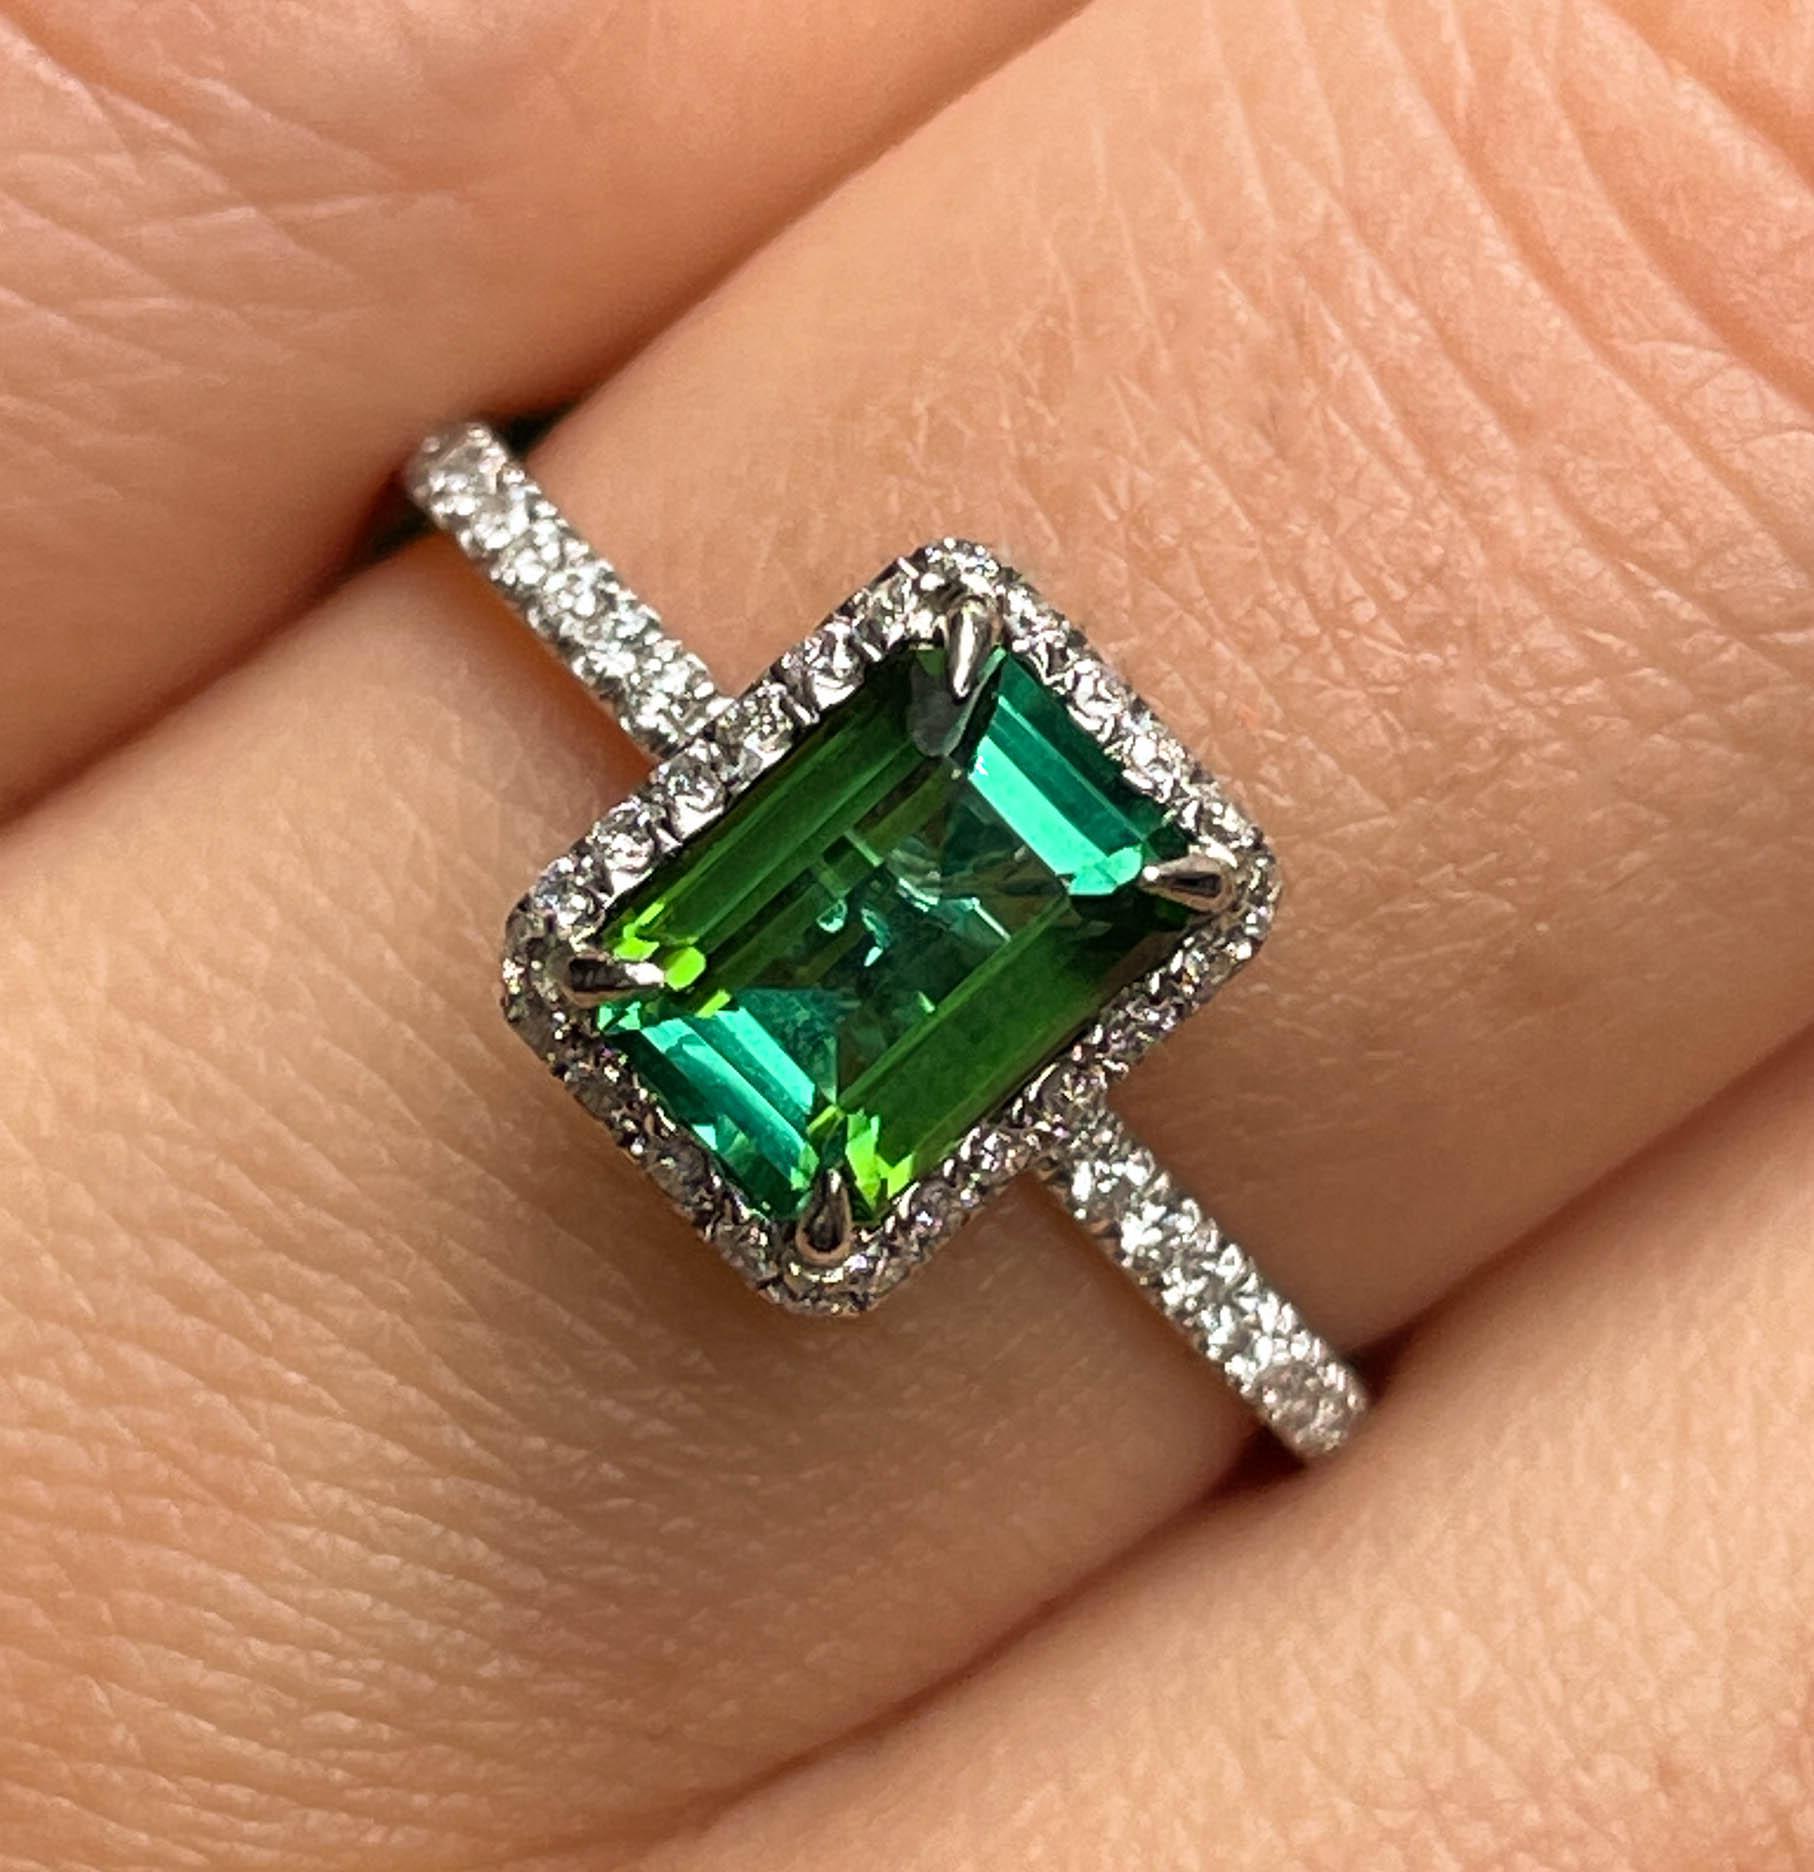 A Beautiful and Elegant Estate Green Tourmaline and Diamond Ring with 1.02ct Natural Step cut Green Tourmaline Center stone.
It is set into Micro Pave cut out Halo Mounting in Platinum (tested), the Top’s outline Measurement is 8.74mm x 6.87mm.